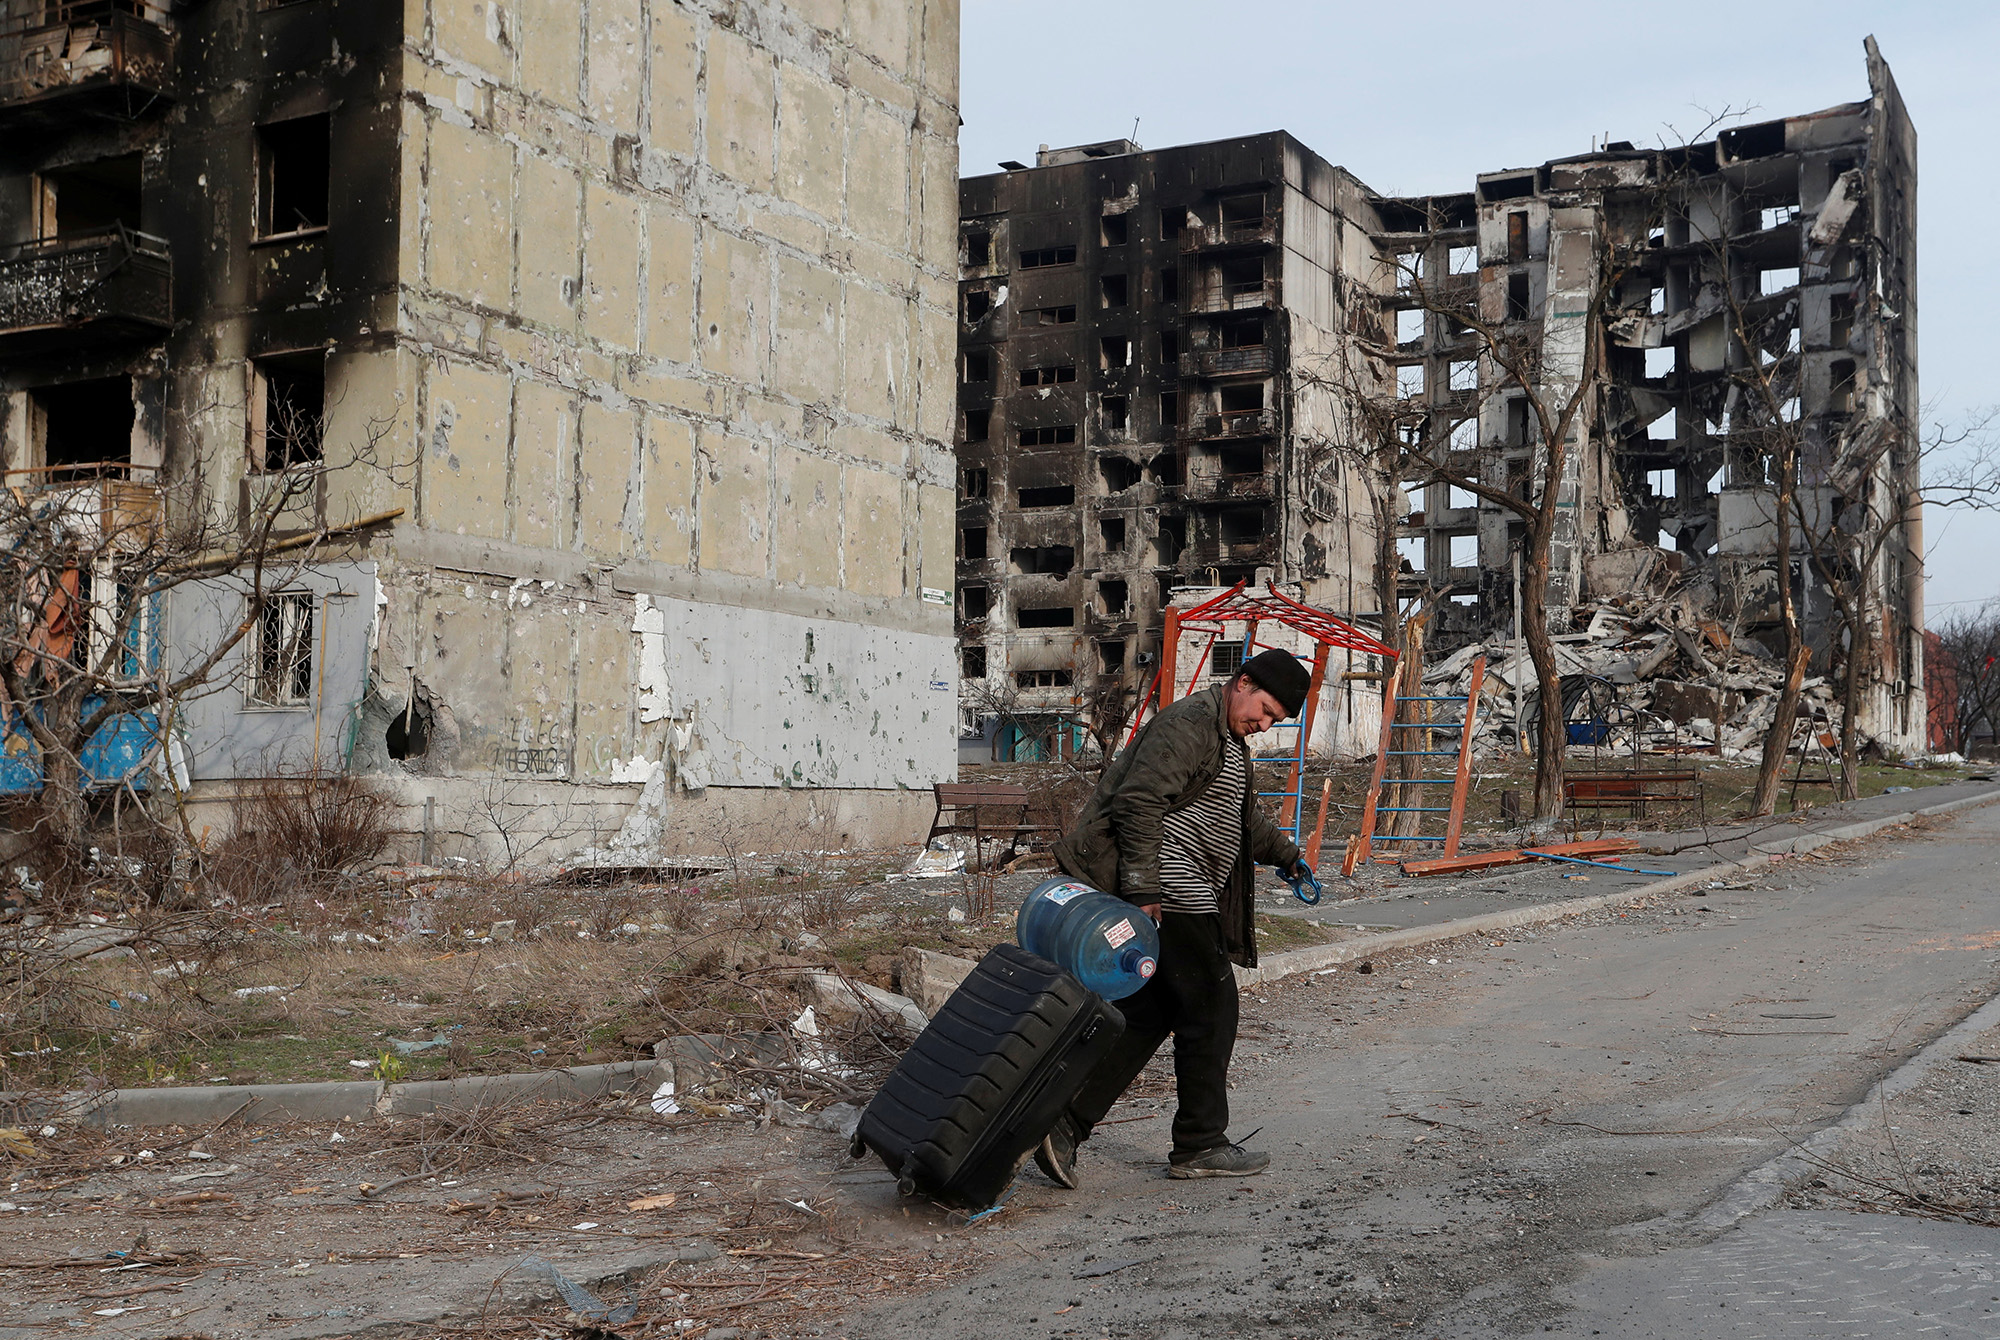 A local resident walks with a suitcase past destroyed apartment buildings in the besieged southern port city of Mariupol, Ukraine, on March 30.